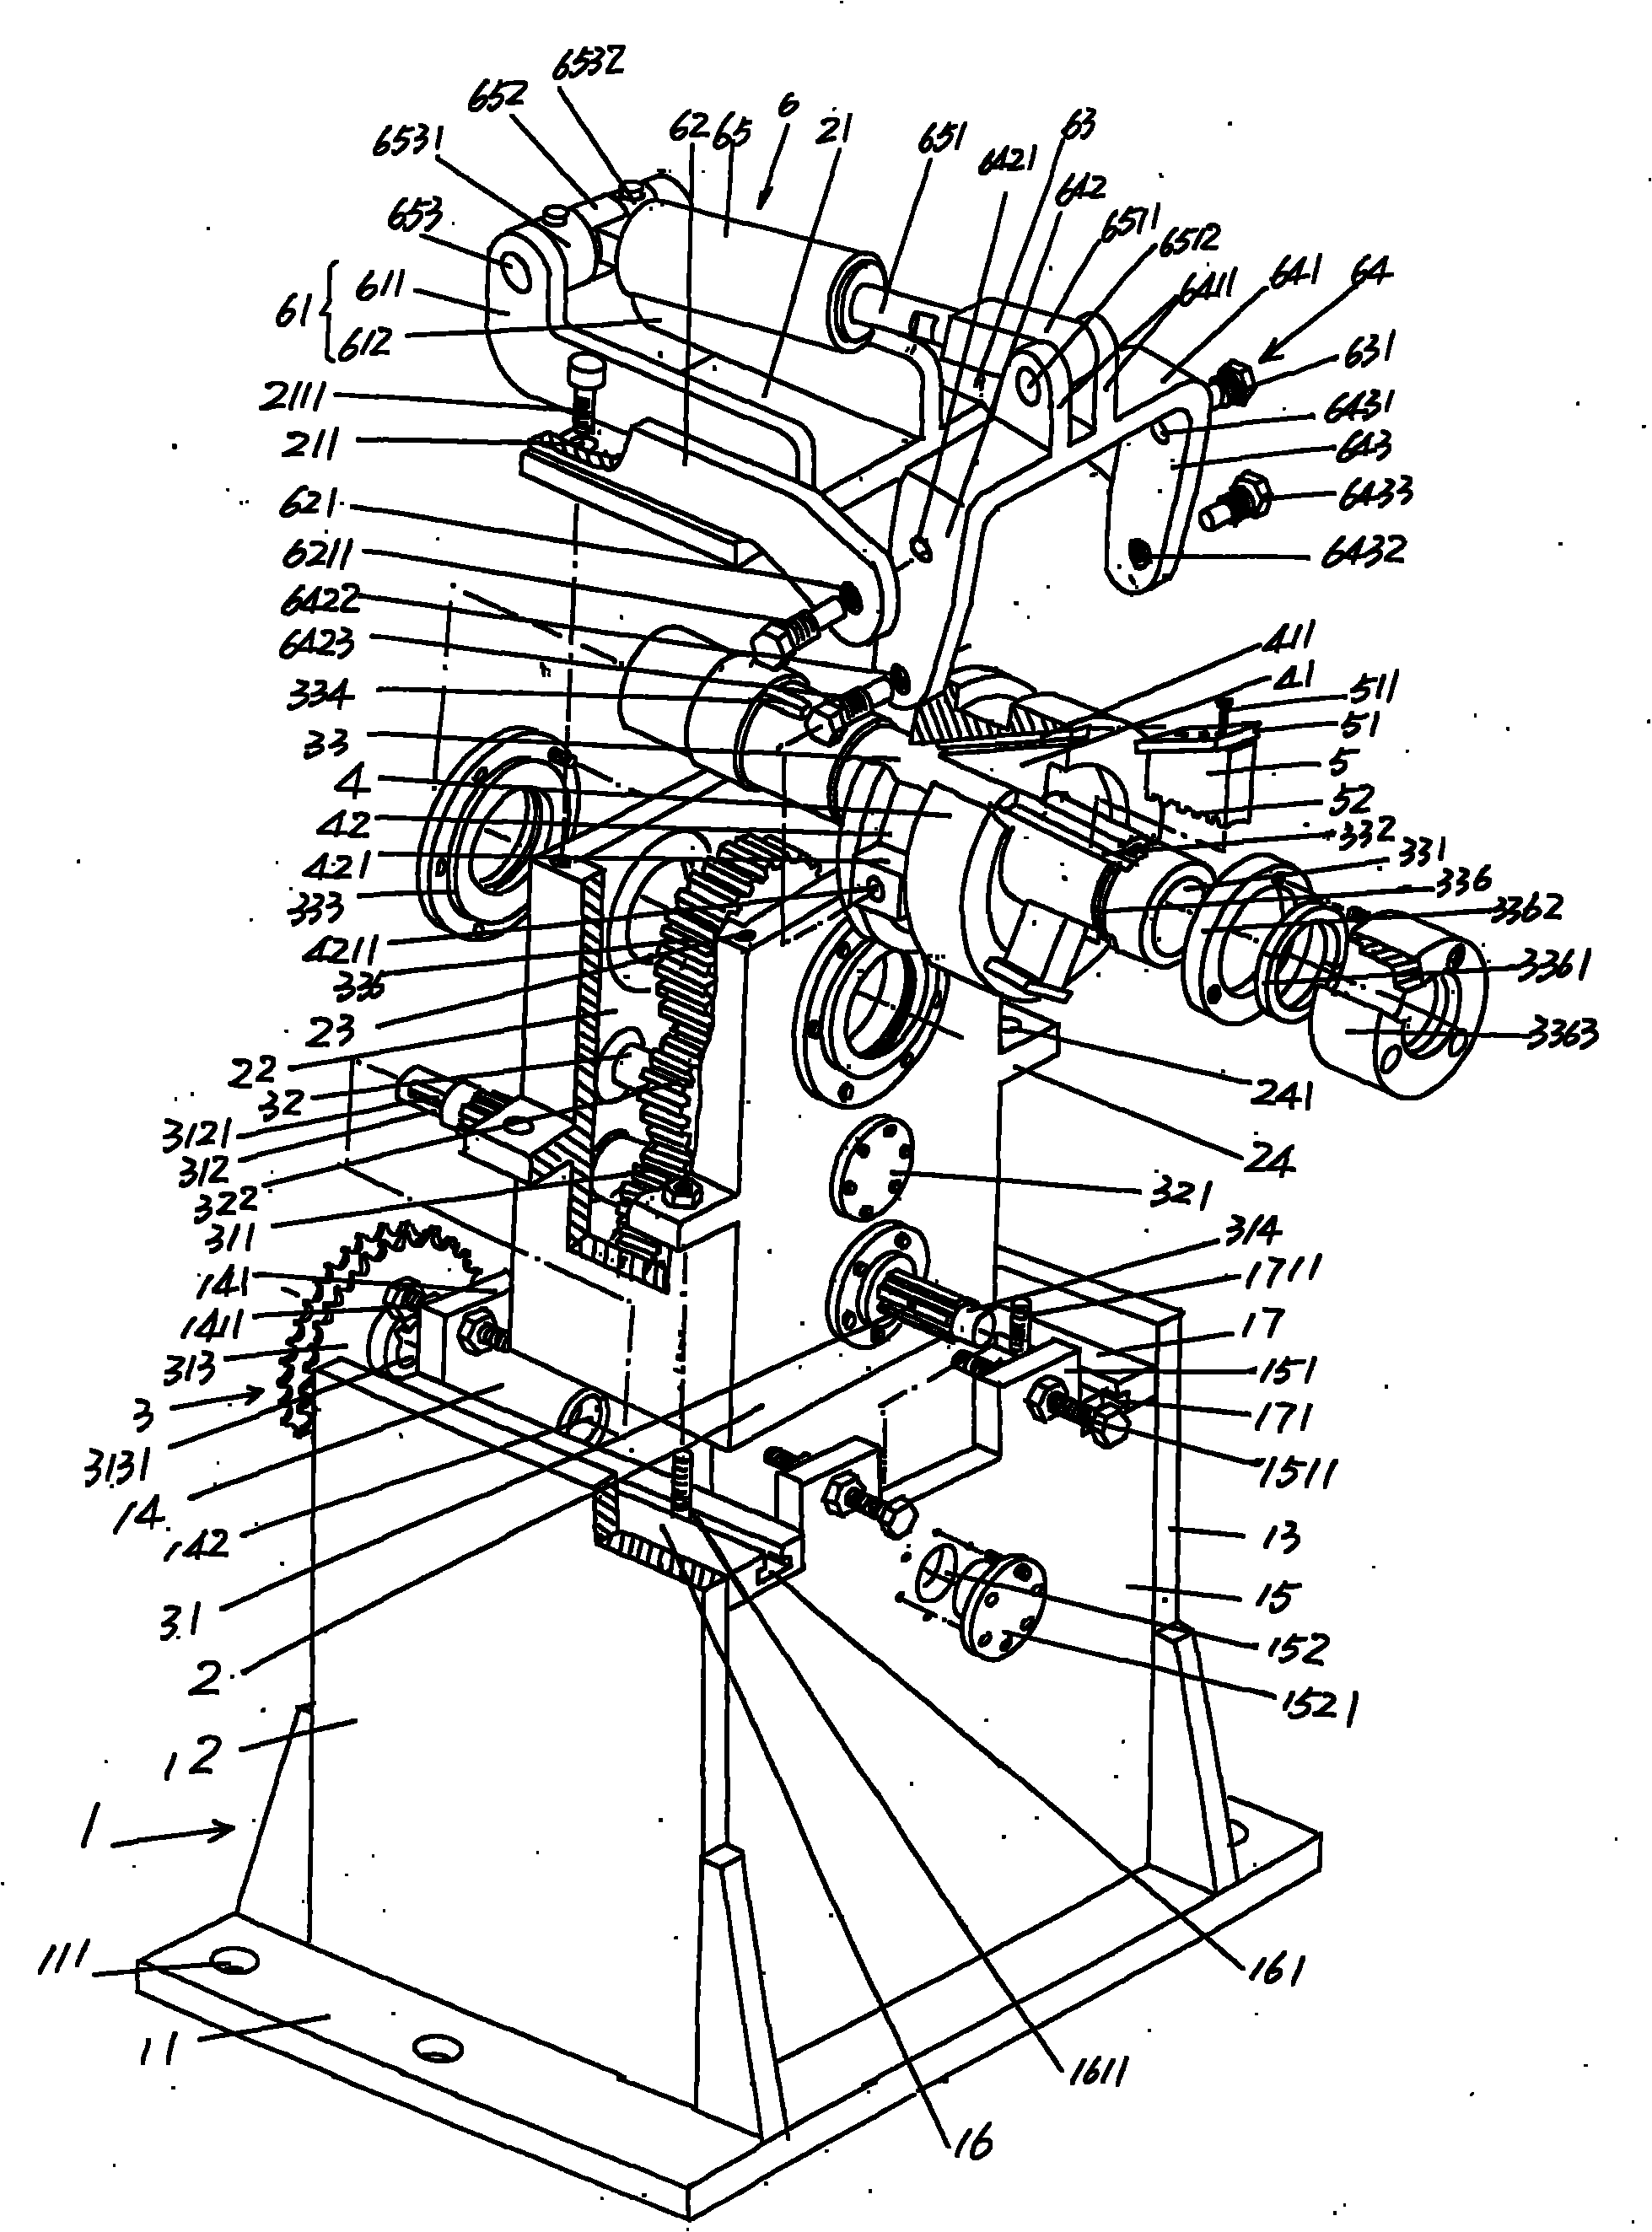 Swing mechanism of cold-rolling pipe mill